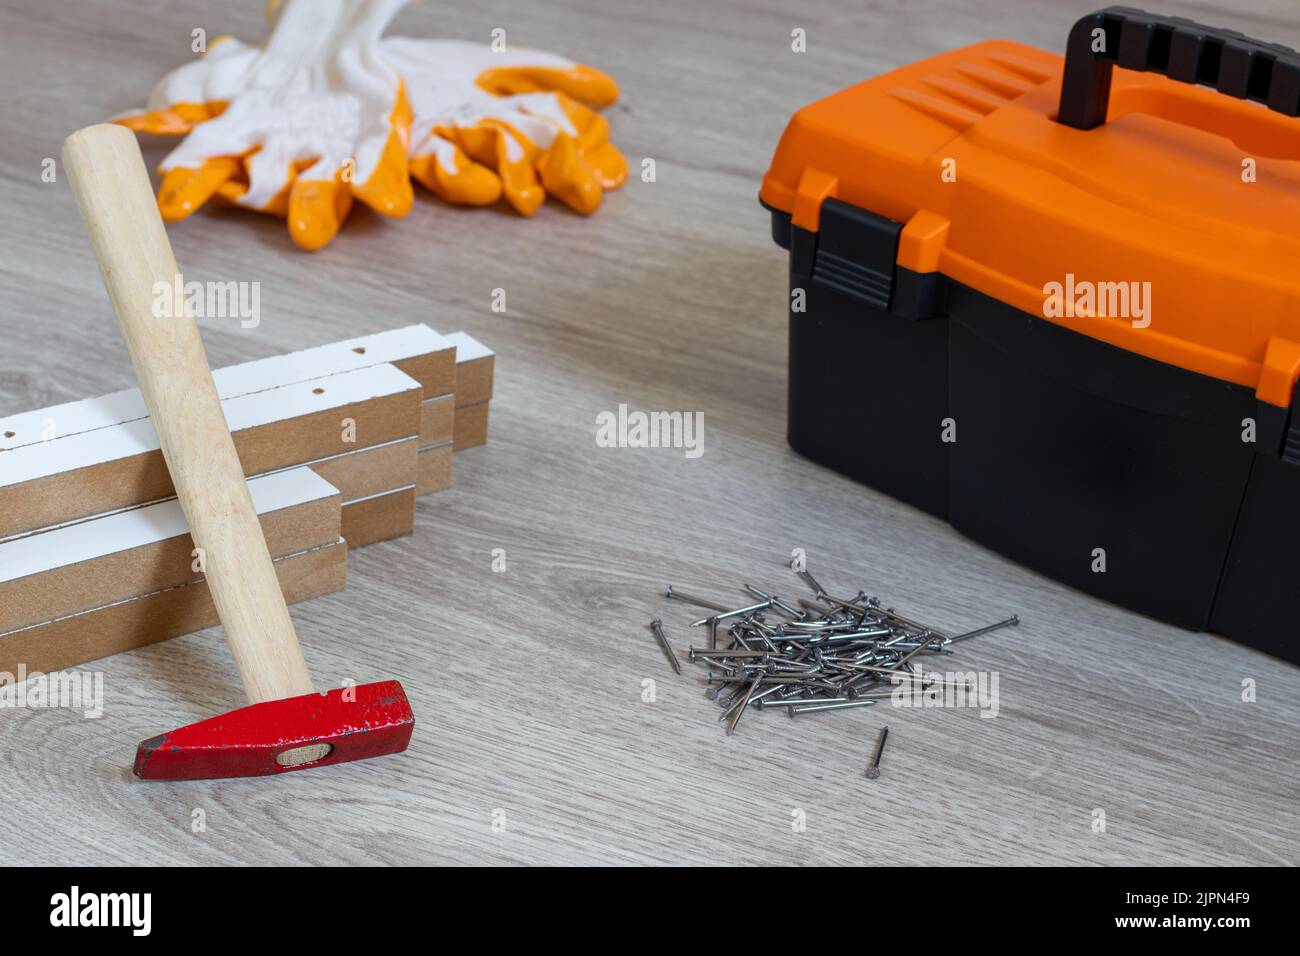 Toolbox on wooden floor . Chipboards, hammer and nails. Stock Photo